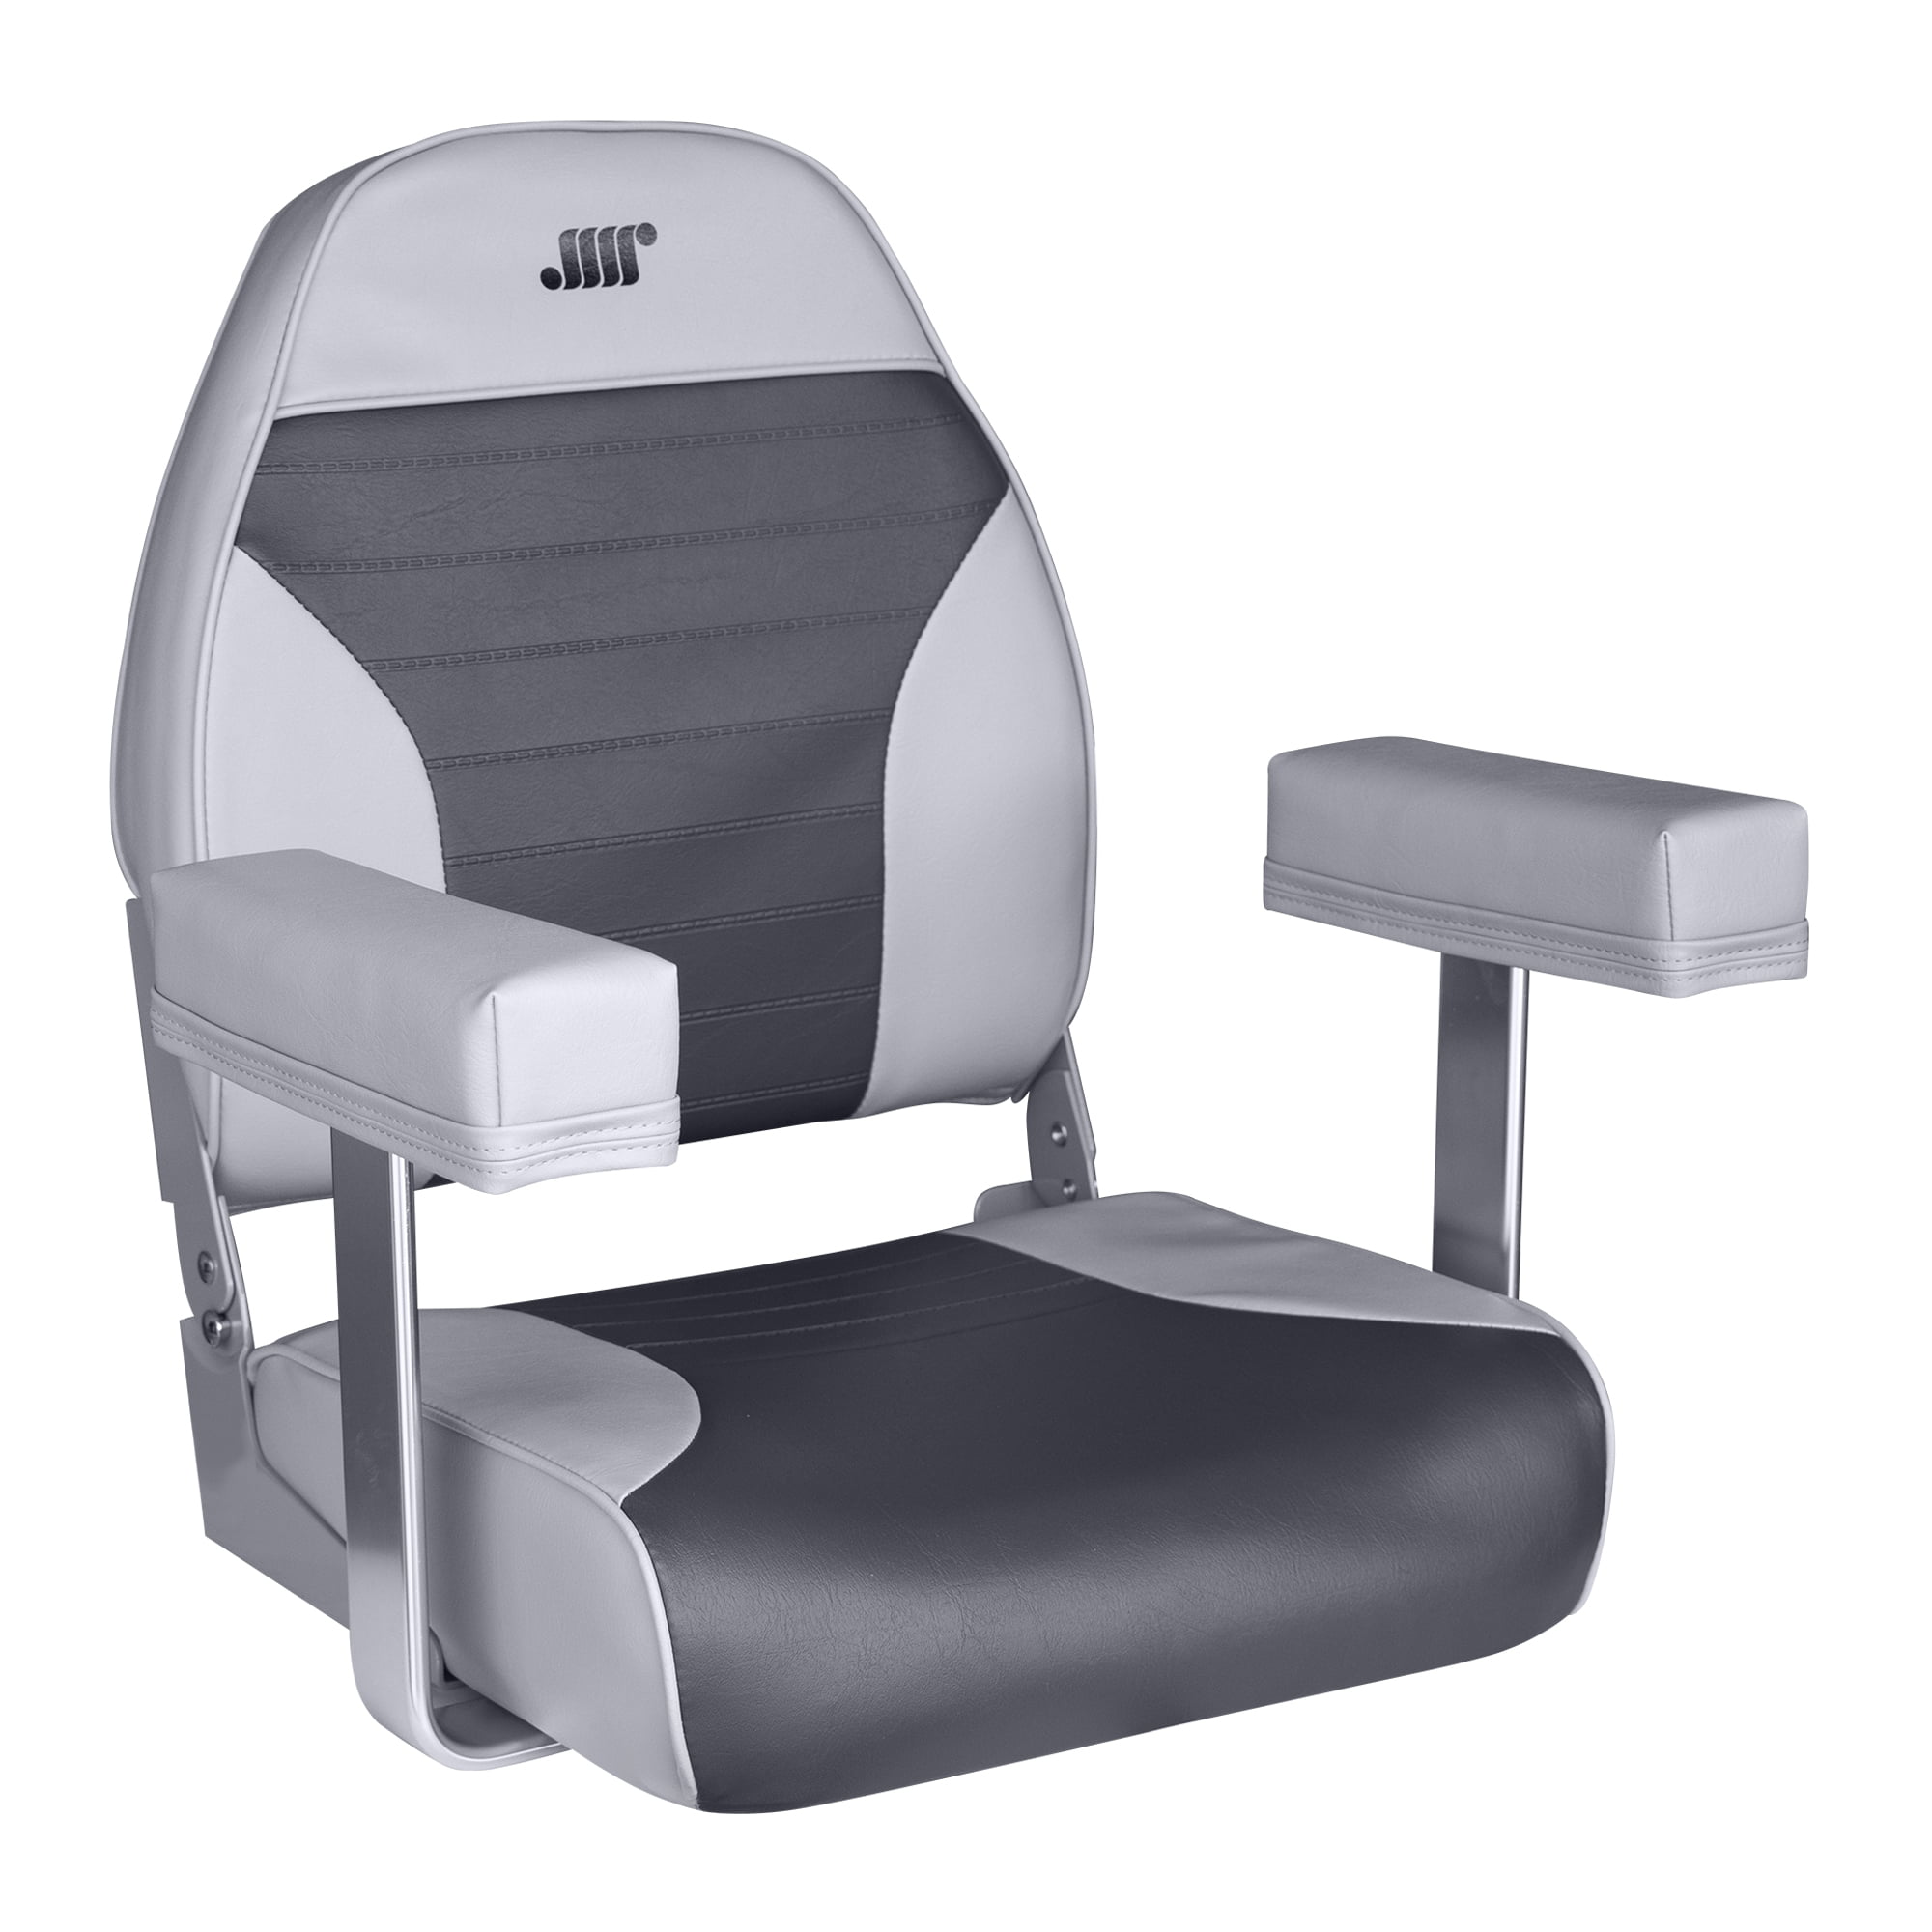 Wise 8WD444AR-717 Boat Seat Arm Rests, Grey 